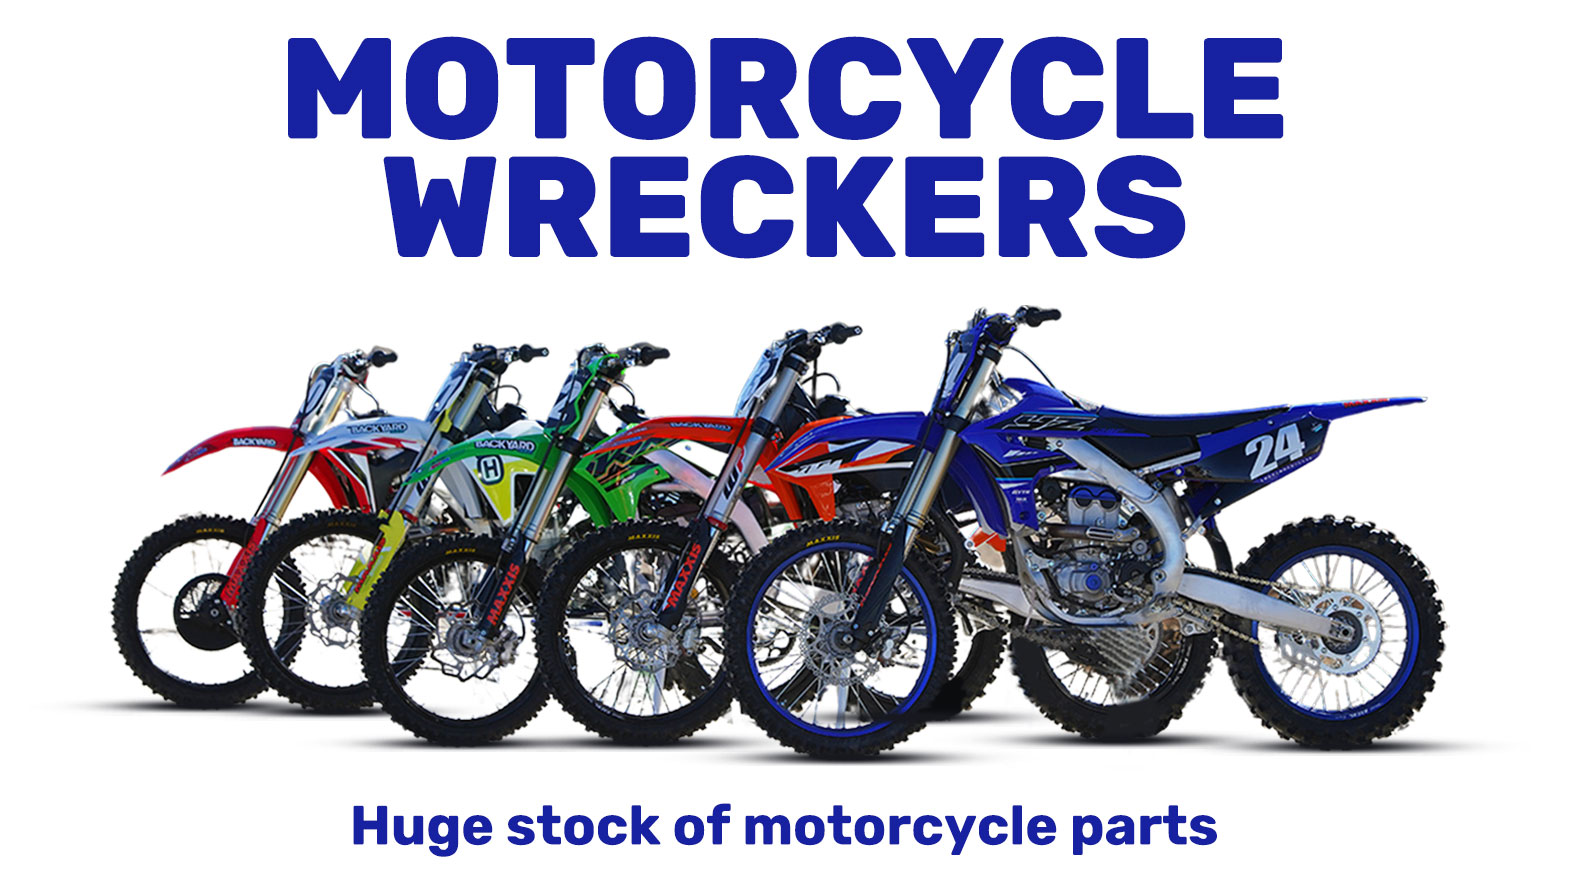 Motorcycle Wreckers - Australia's Best Bike Wreckers are Now Trading Online